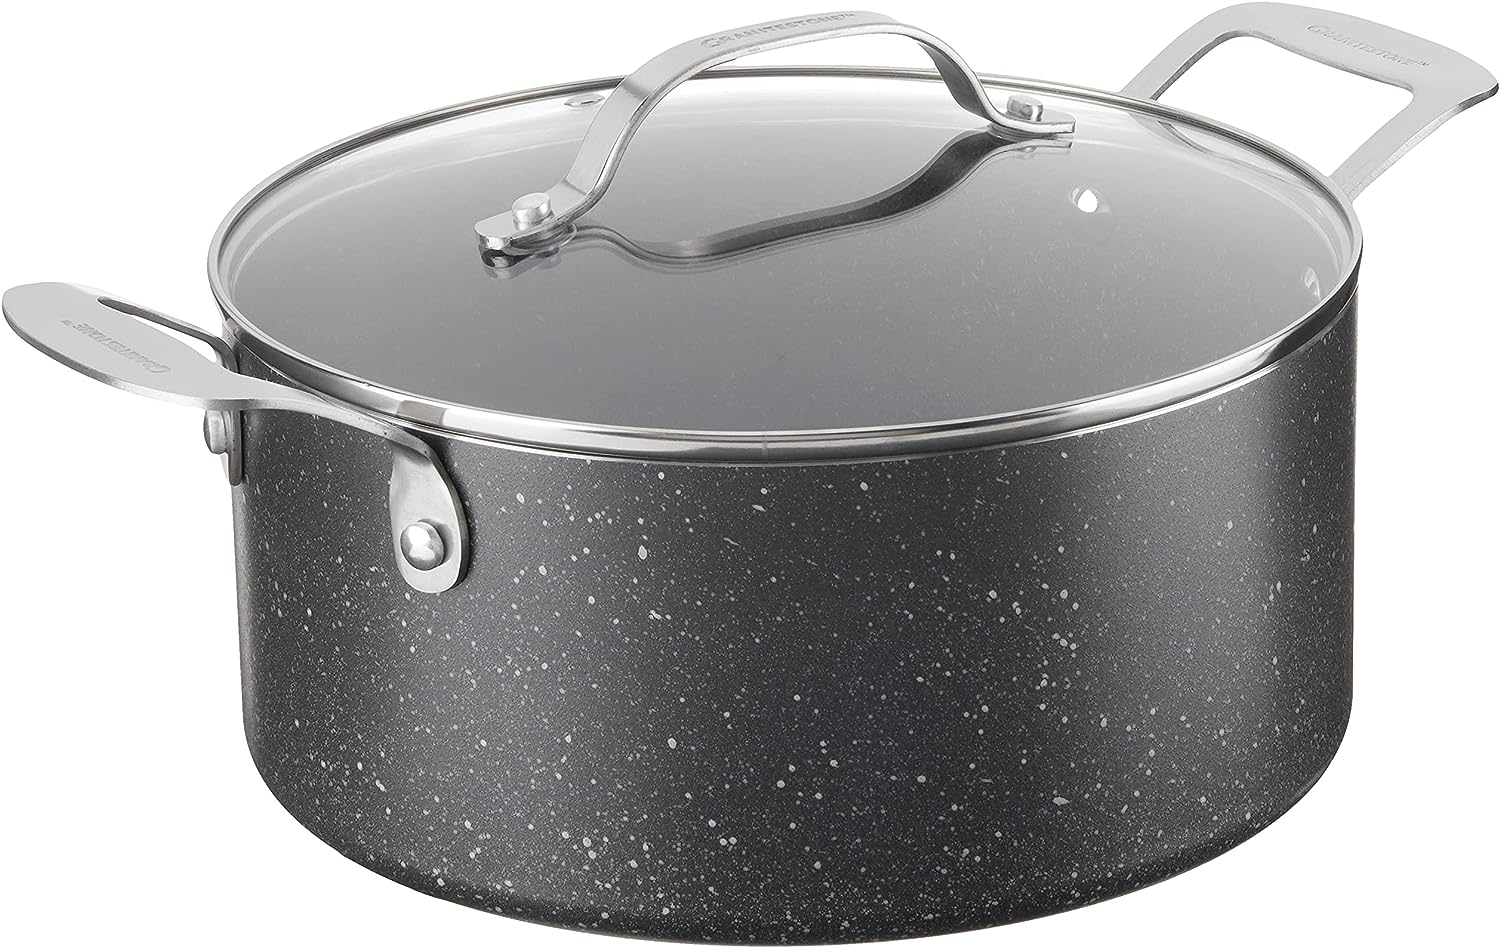 GraniteStone Diamond 5 qt. Aluminum Stock Pot with Lid - Black, Non-Stick,  Dishwasher Safe, Oven Safe, Induction Compatible in the Cooking Pots  department at